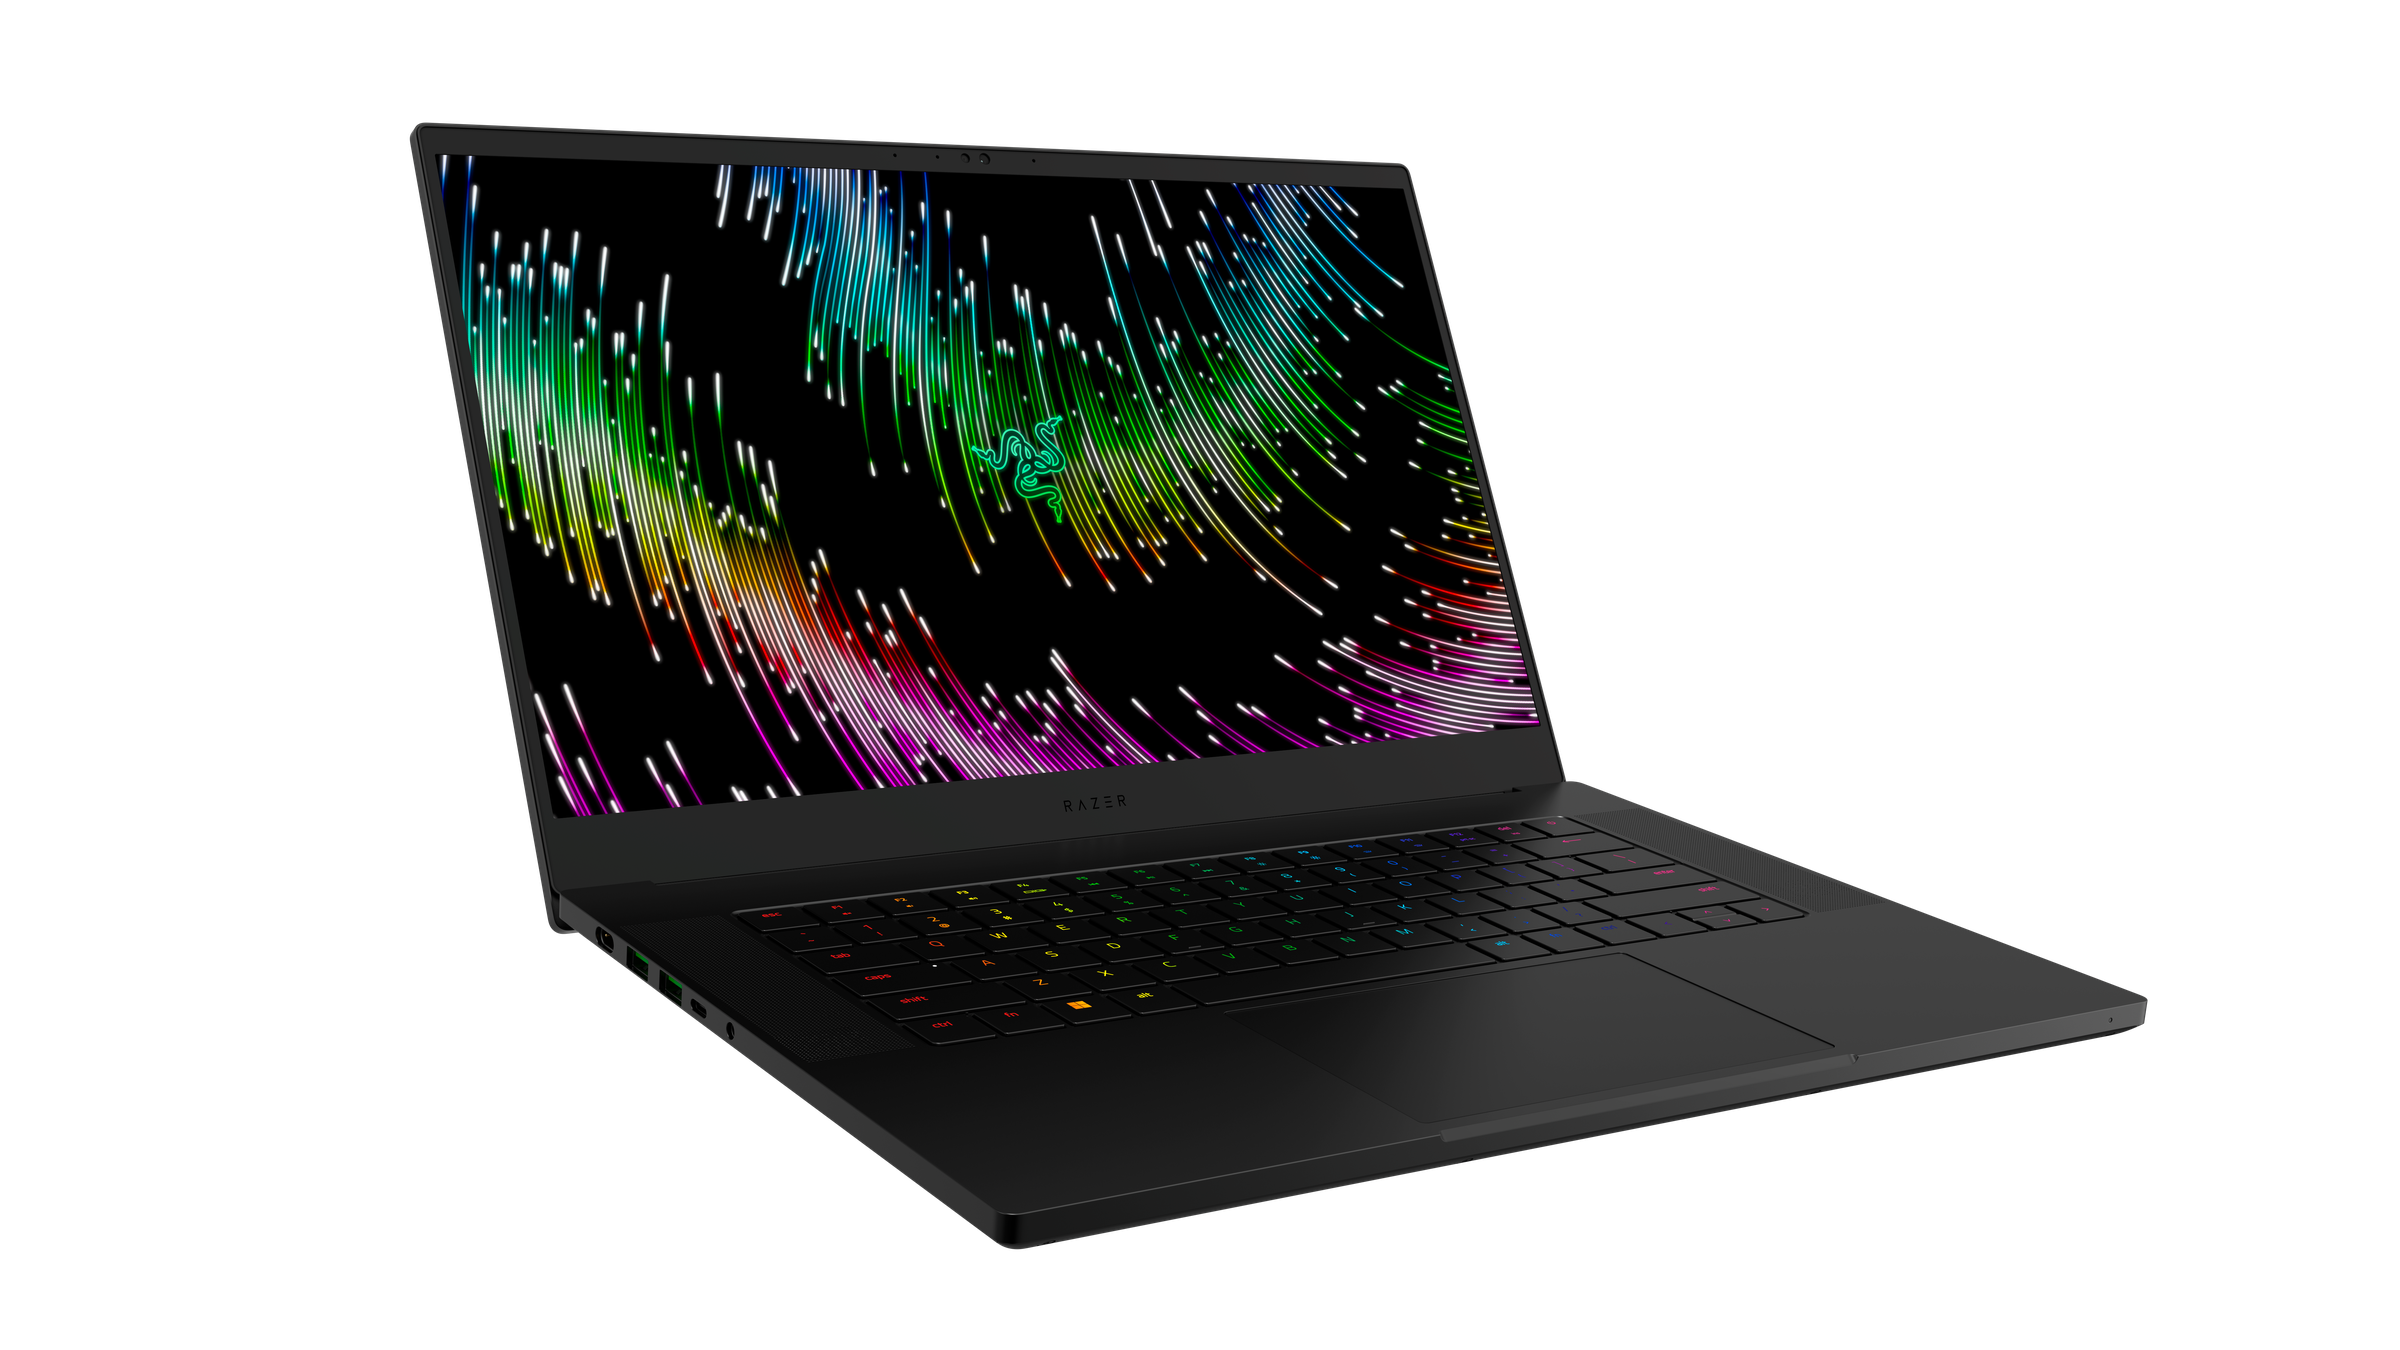 The Razer Blade 15 angled to the right and open on a white background, displaying a multicolored desktop.